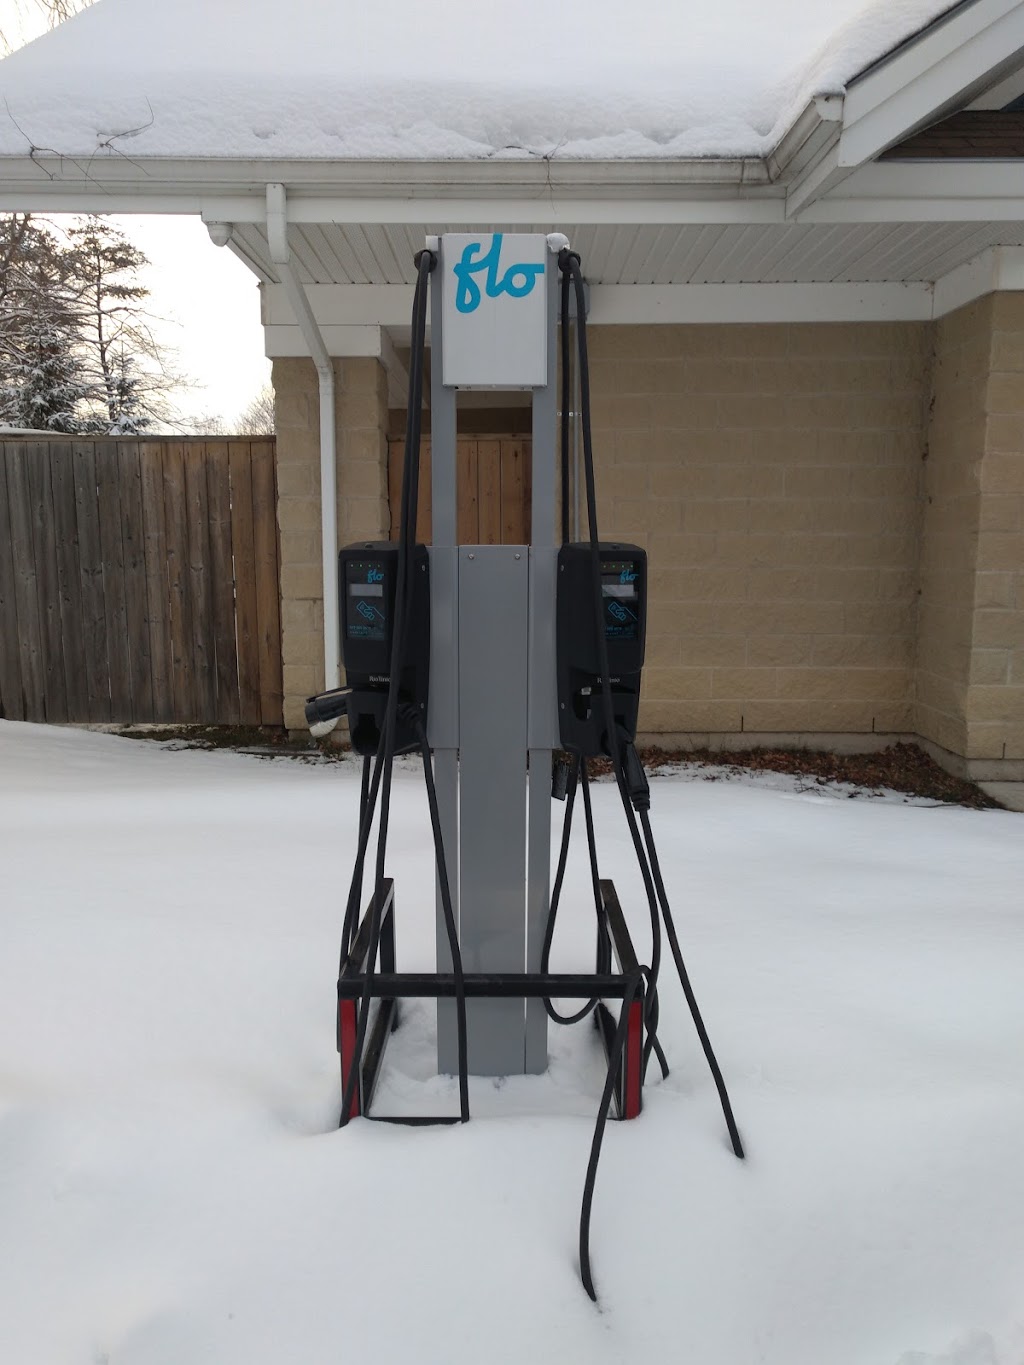 Flo Charging Station | 268 Berford St, Wiarton, ON N0H 2T0, Canada | Phone: (844) 825-3356